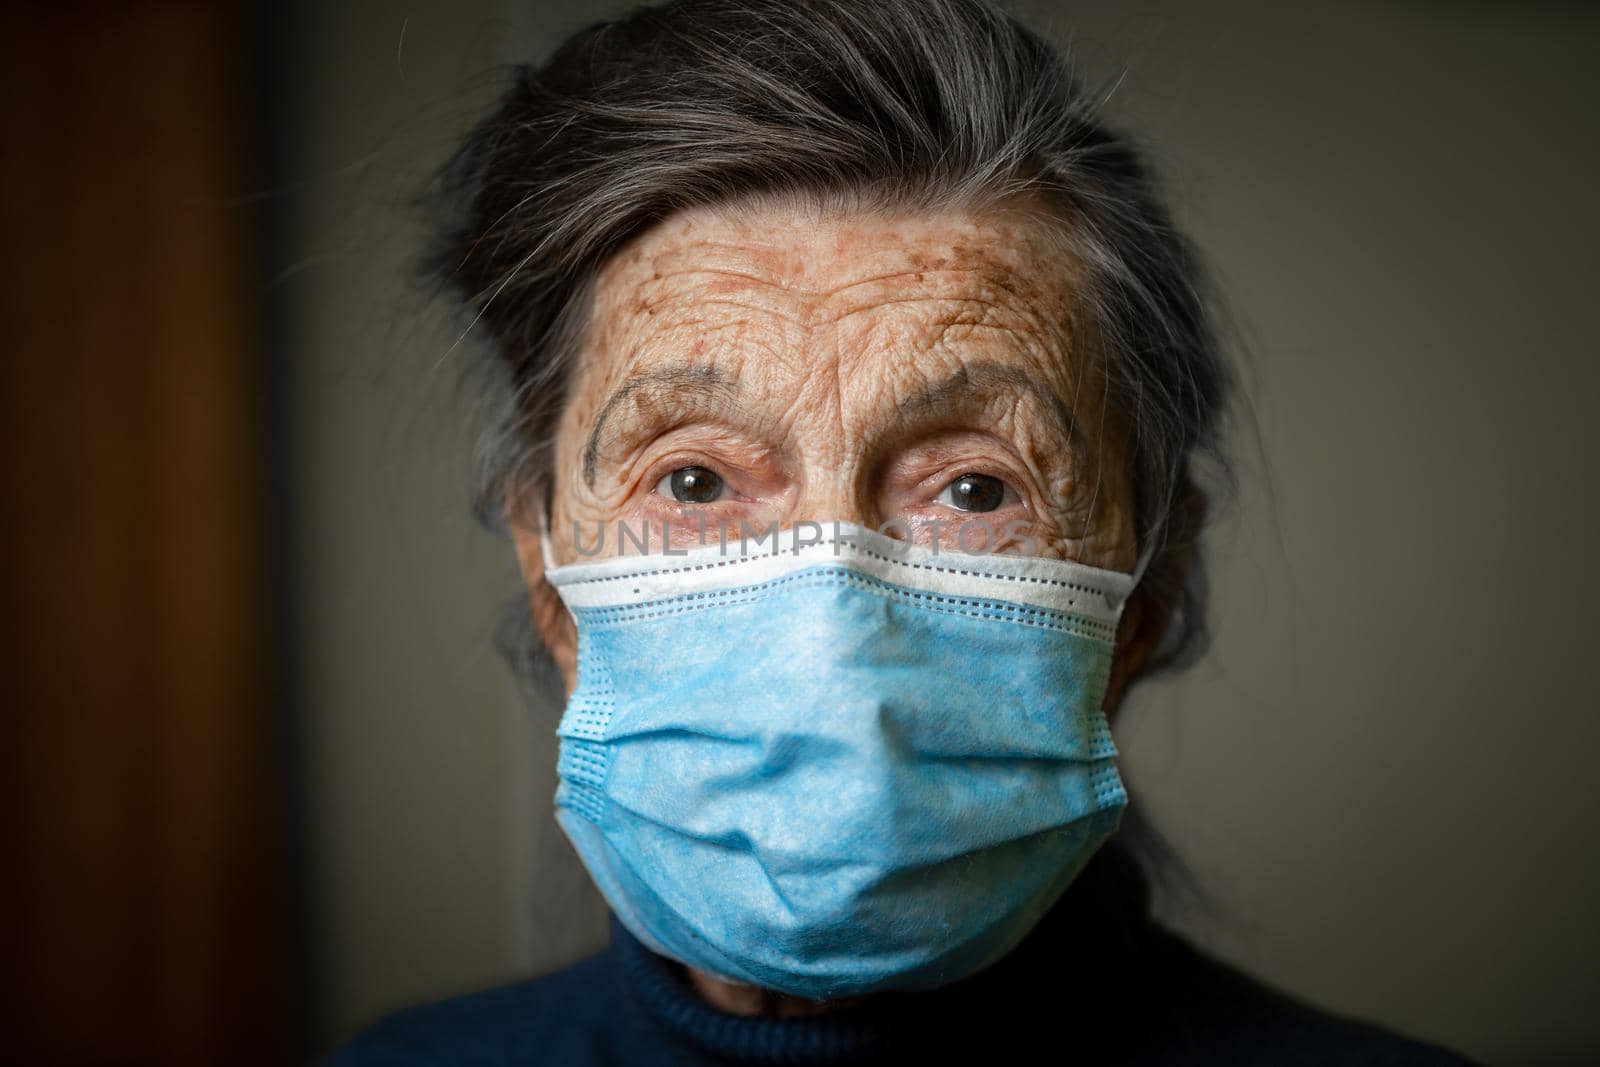 Elderly Caucasian woman with wrinkles on face, gray hair, wearing medical mask, looks attentively at camera, feeling need care and support. Topic safe communication, stay at home during diseases by Tomashevska